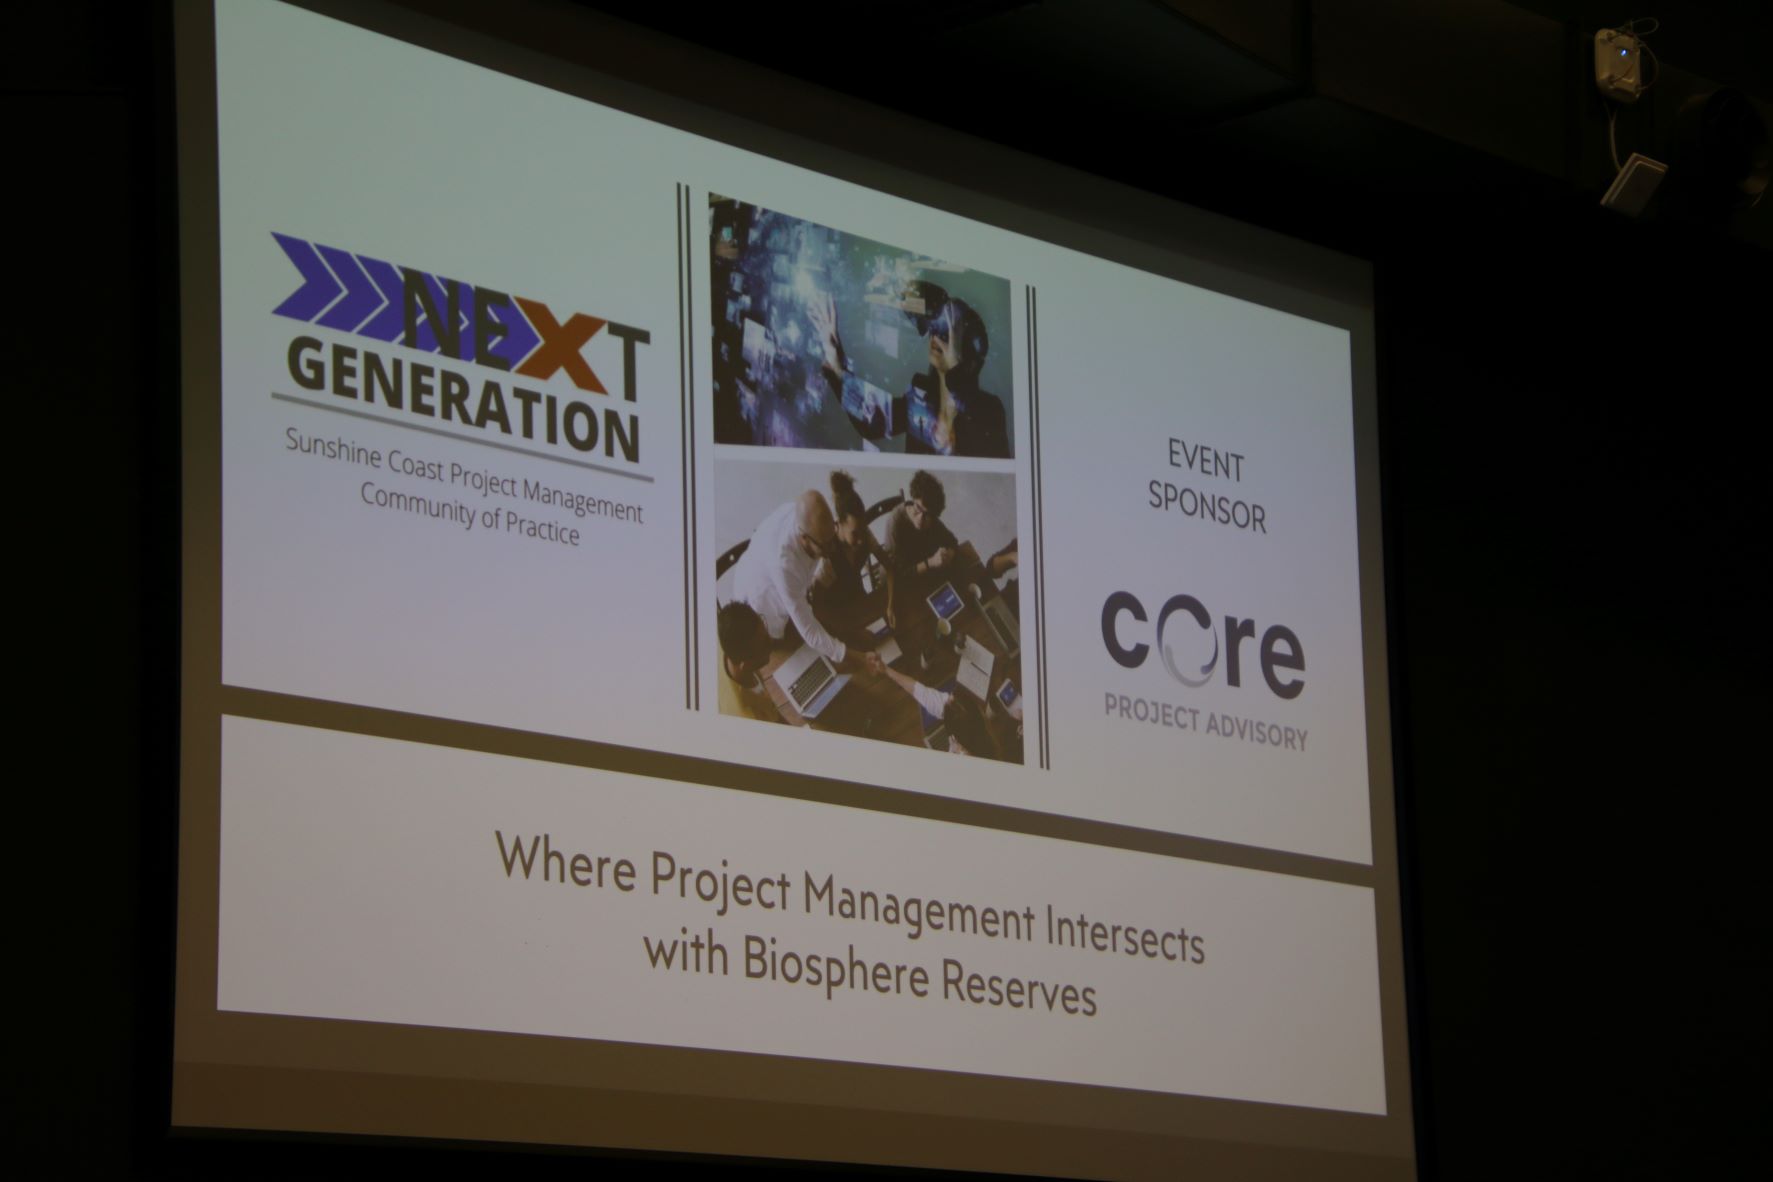 Core Project Advisory Team at Next Generation Event